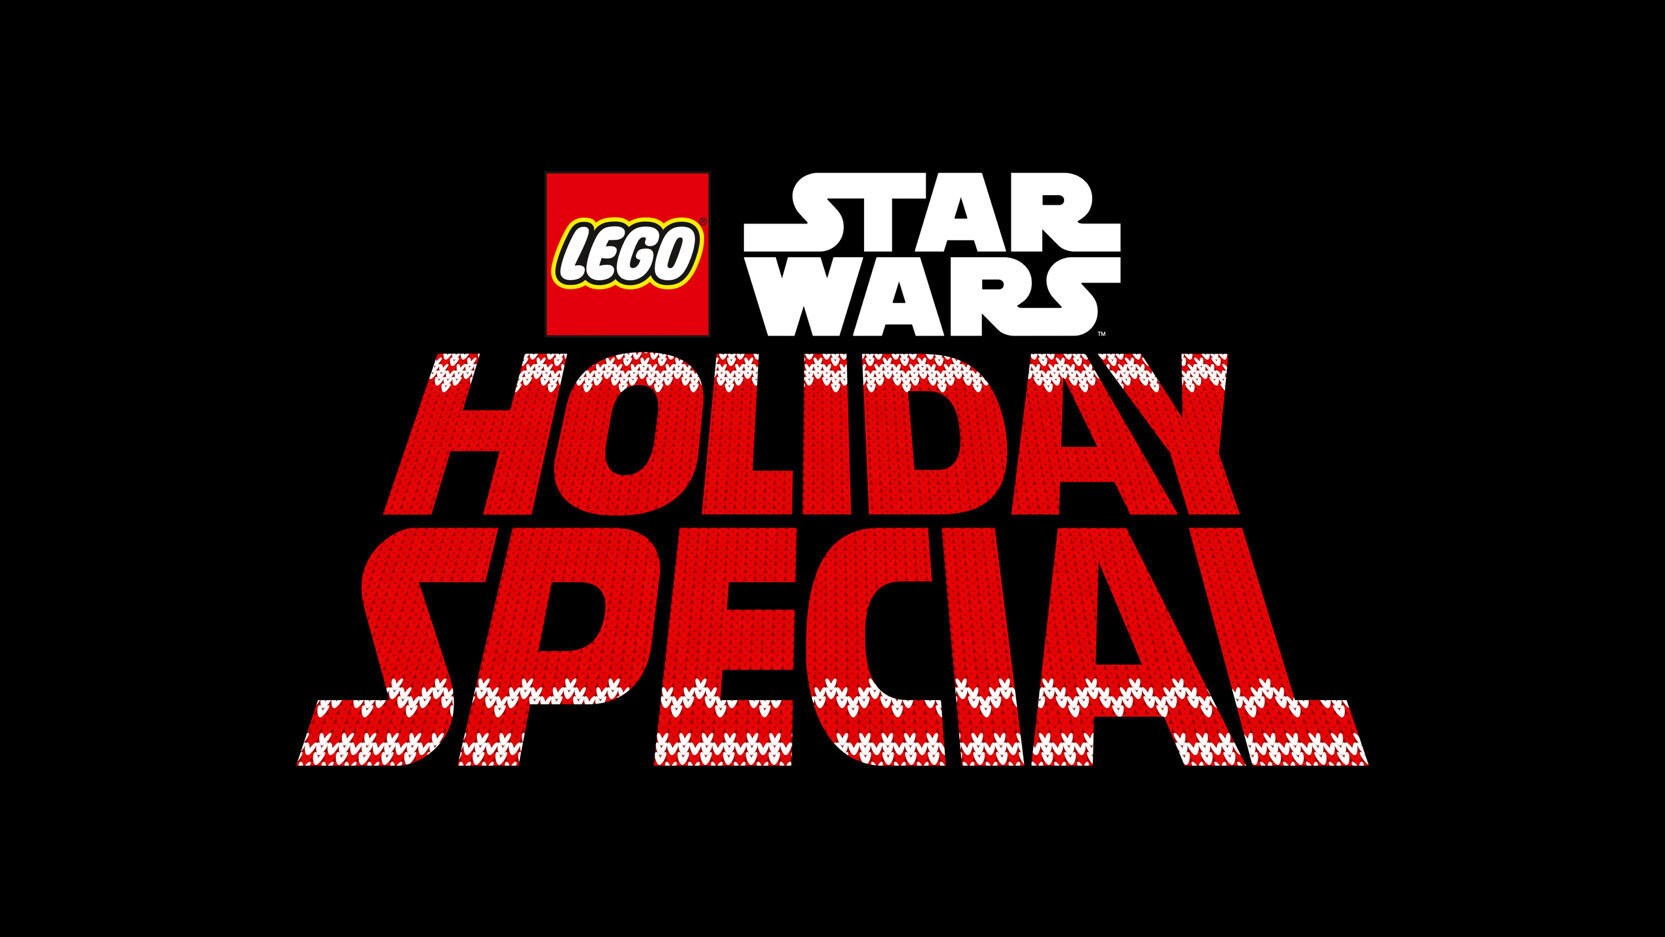 Kelly Marie Tran, Billy Dee Williams, and Anthony Daniels join cast of “LEGO Star Wars Holiday Special”